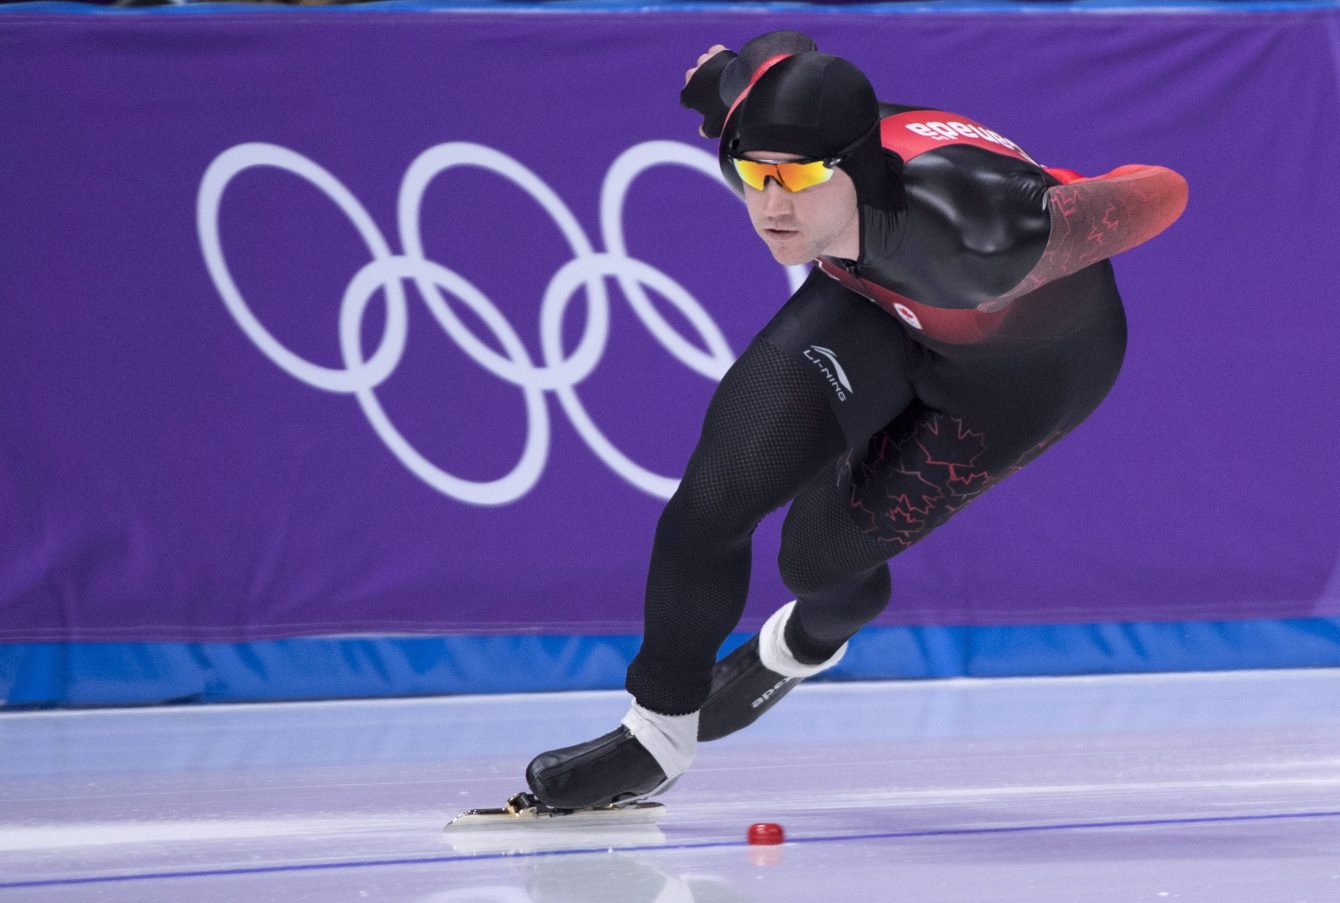 Vincent De Haitre skates in front of Olympic rings